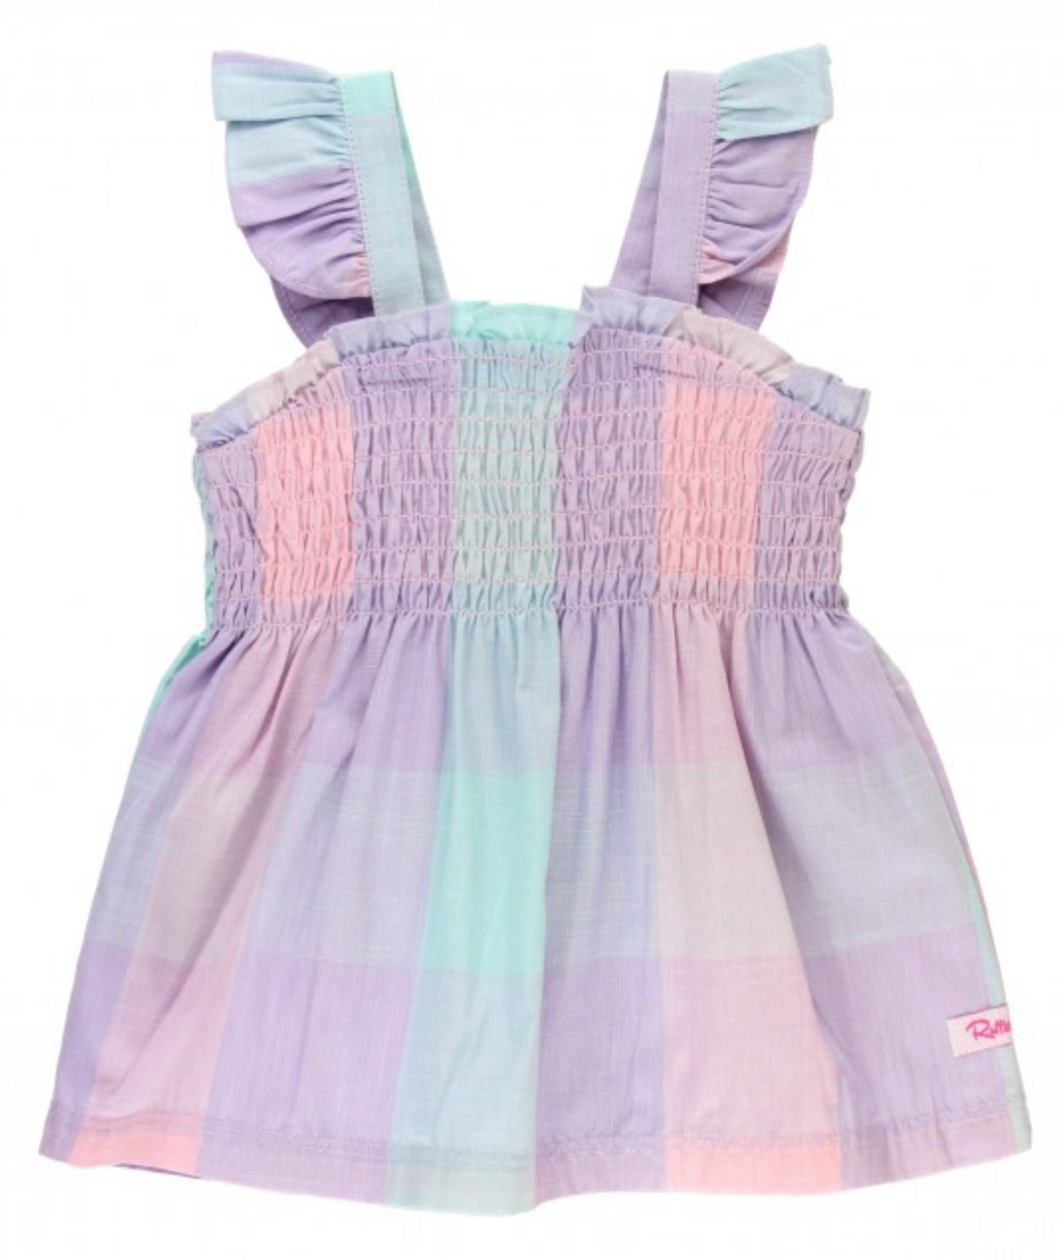 Cotton Candy Smocked Tank Top